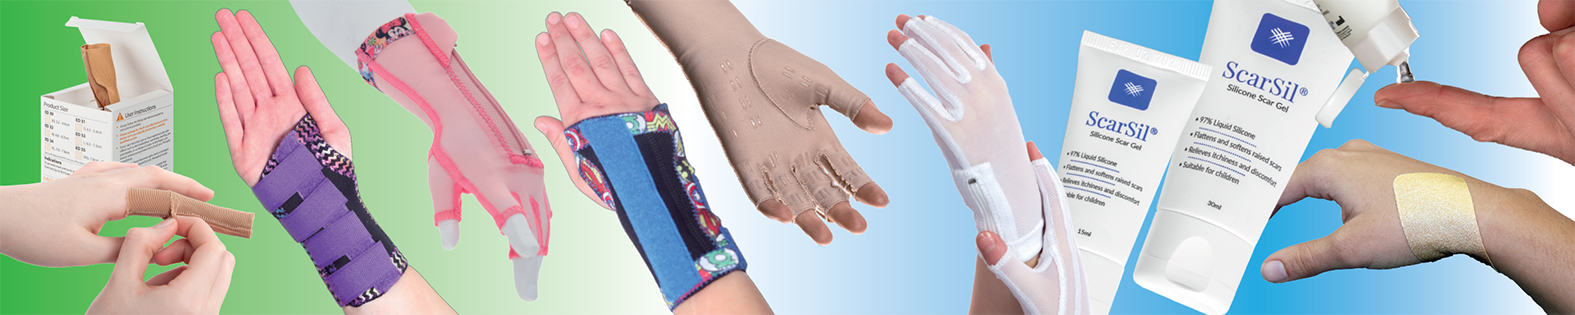 Hand Therapy Mini Banner